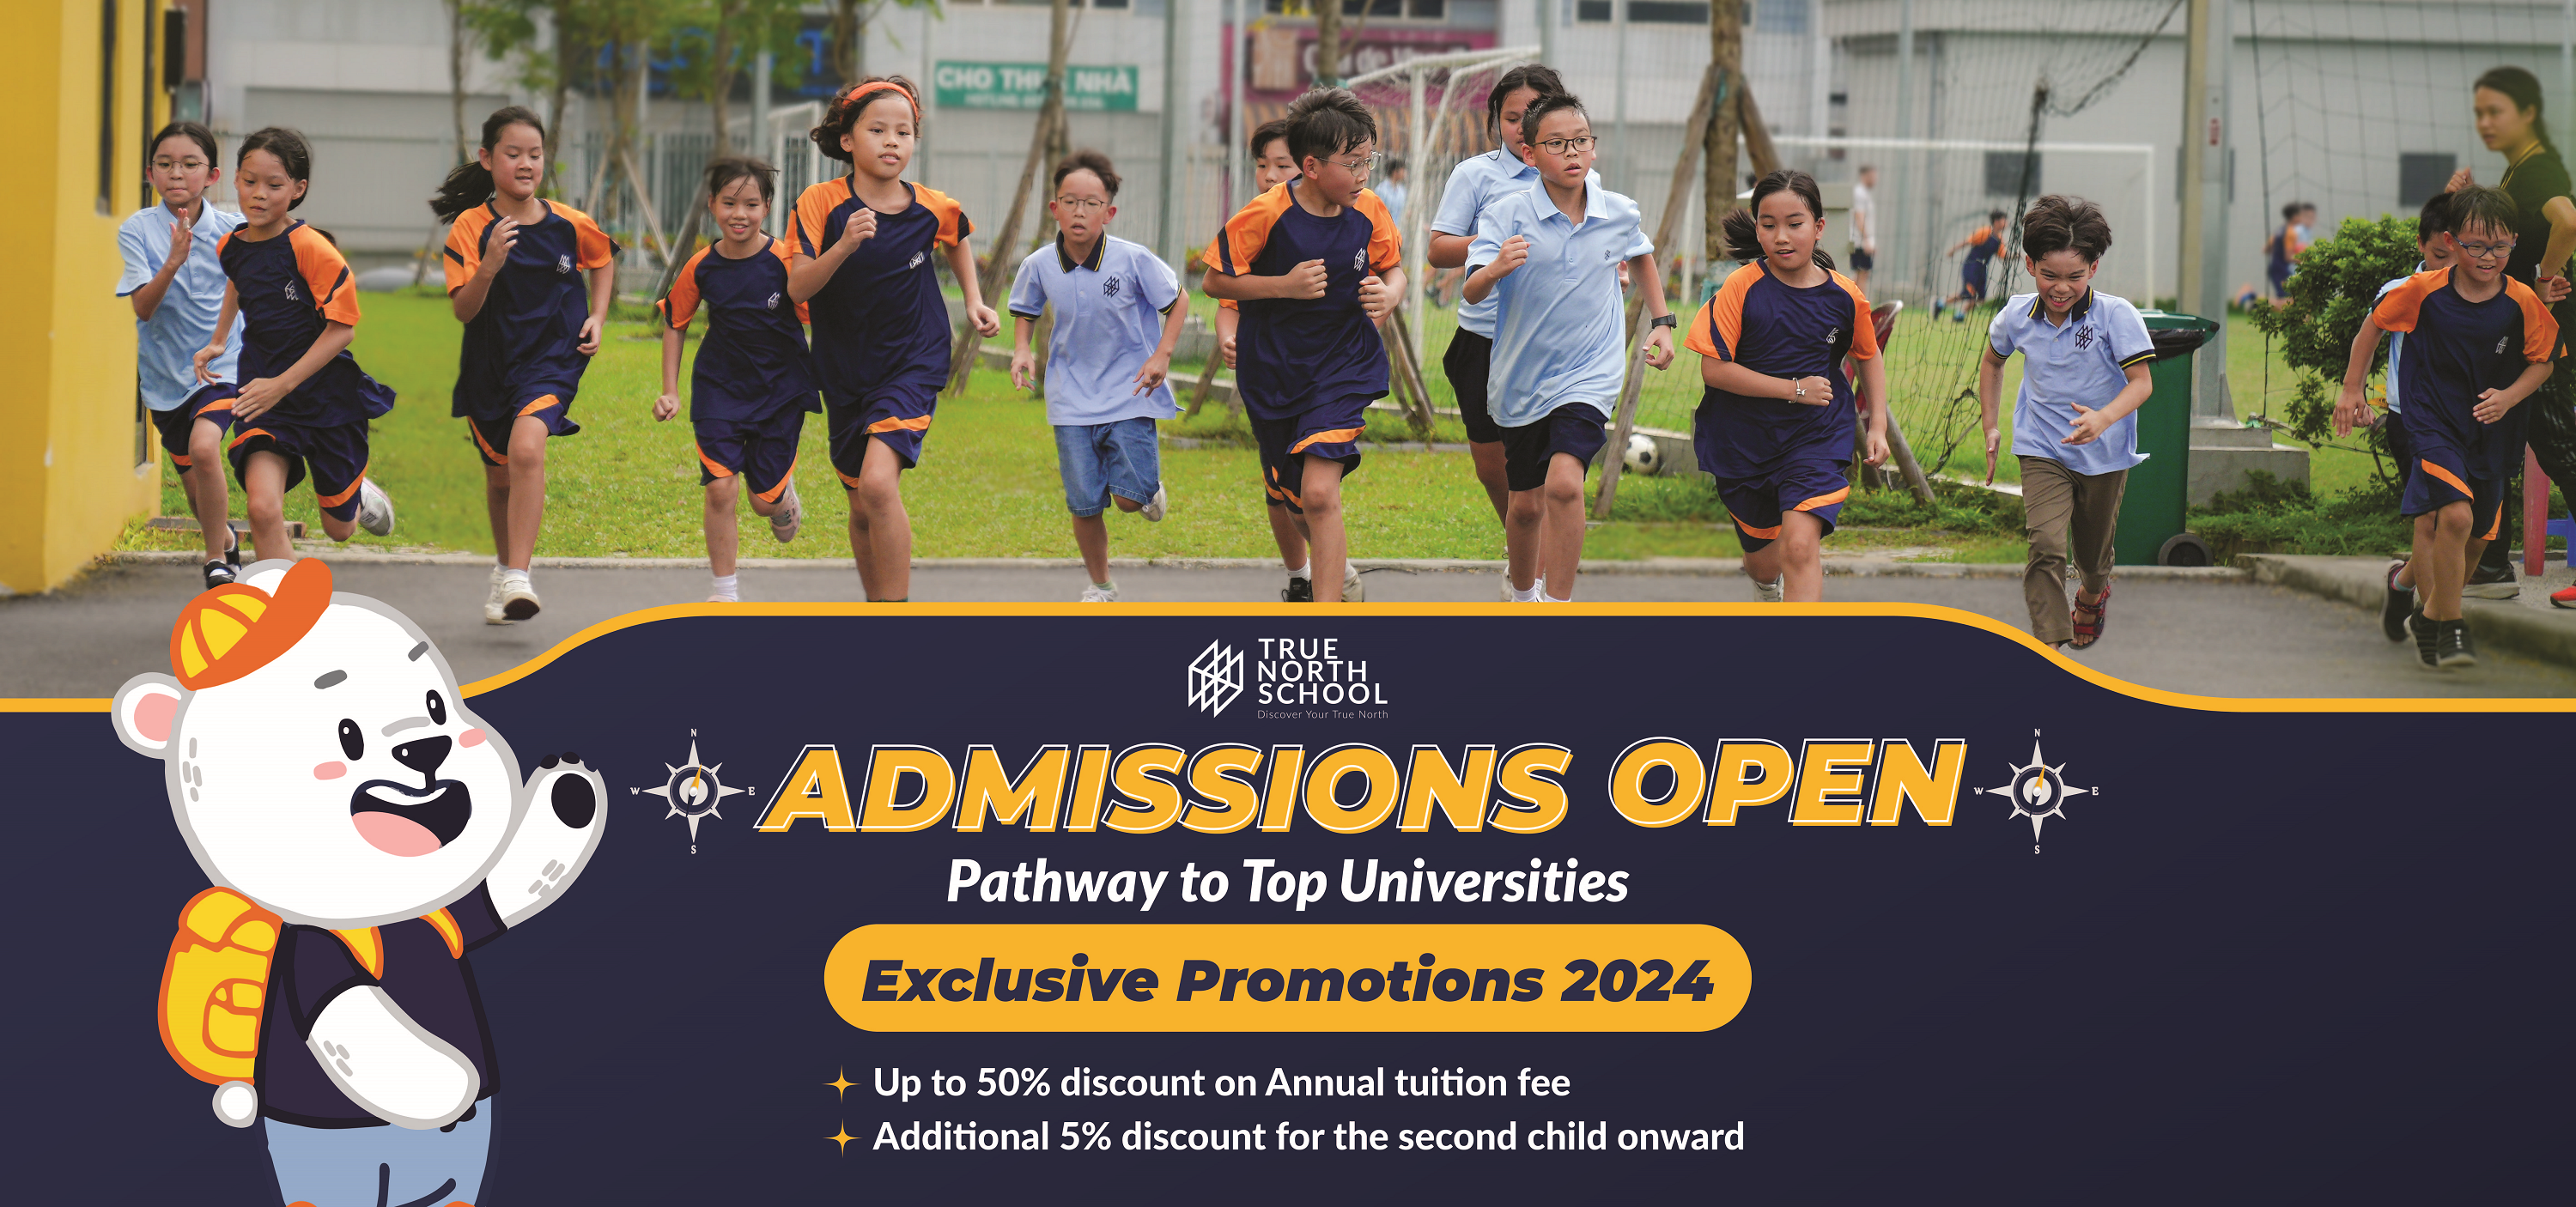 True North School's Exclusive 2024-2025 Offer: Up to 50% Off Tuition Fees